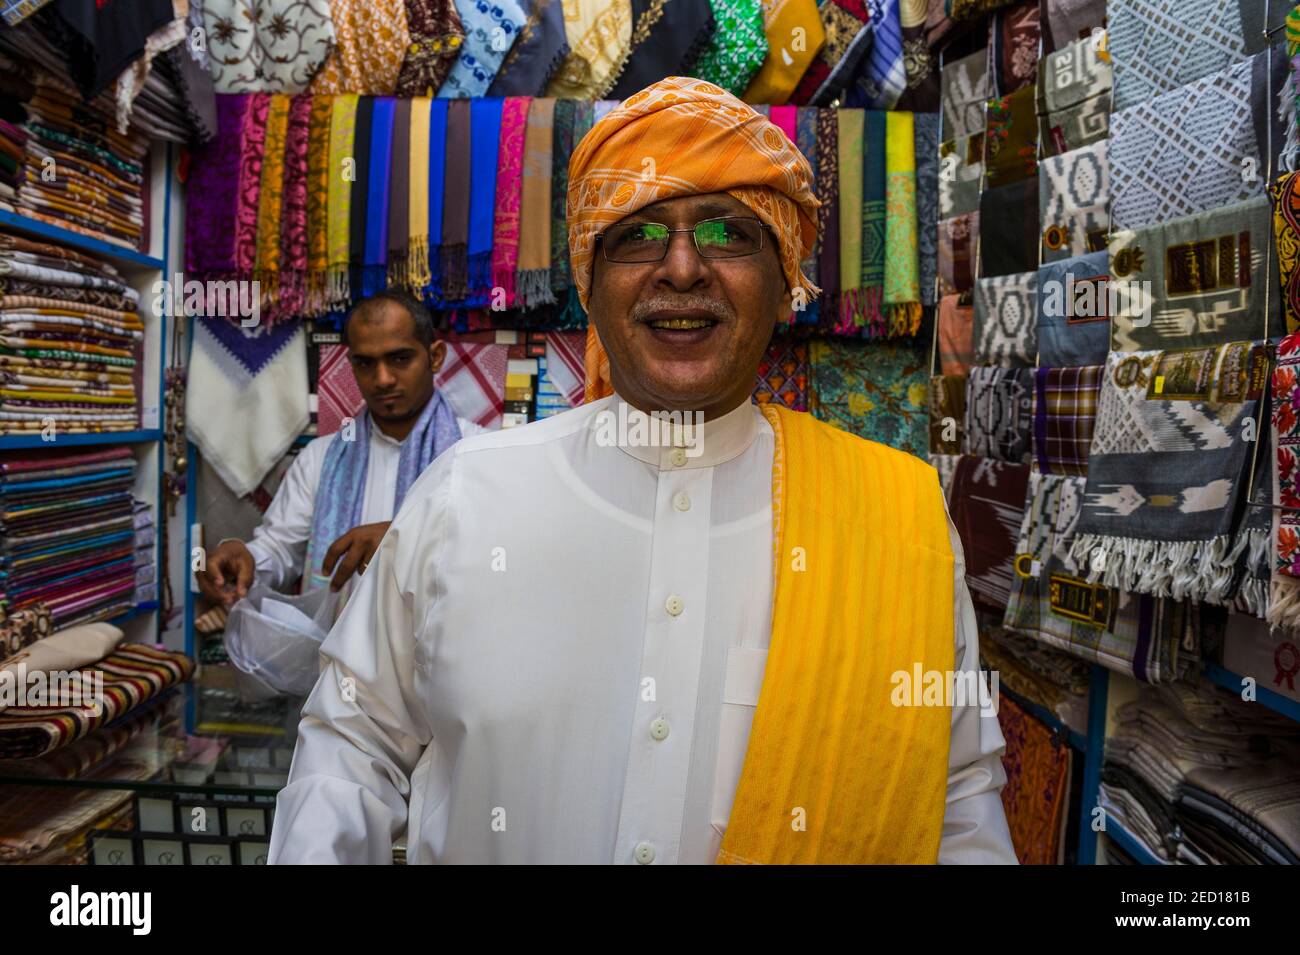 Traditional dressed man in a cloth shop, old town of Jeddah, Saudi Arabia Stock Photo